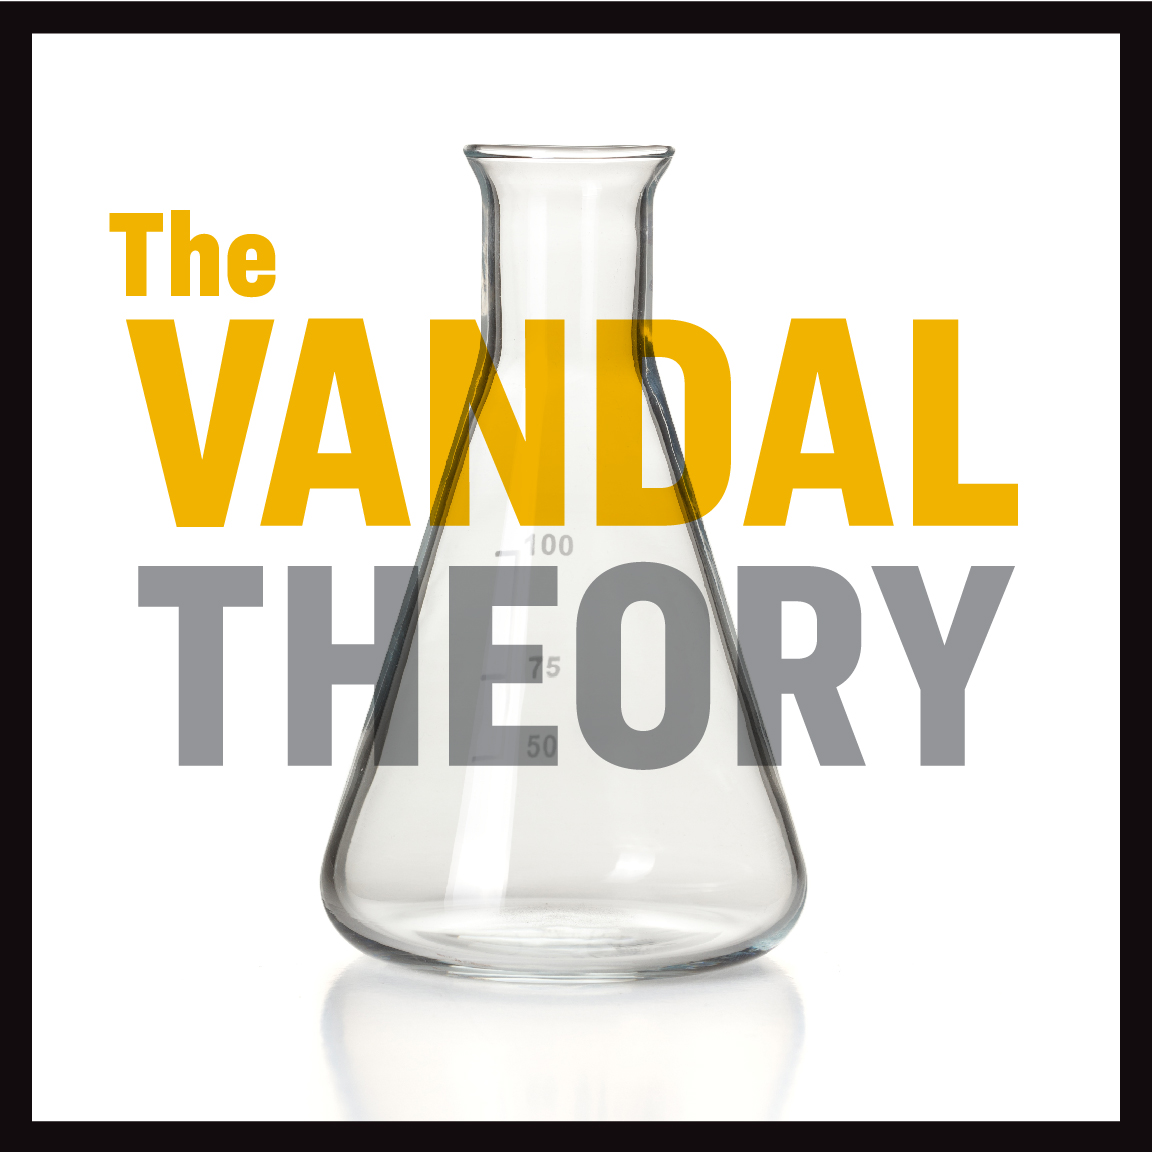 The logo for The Vandal Theory podcast.